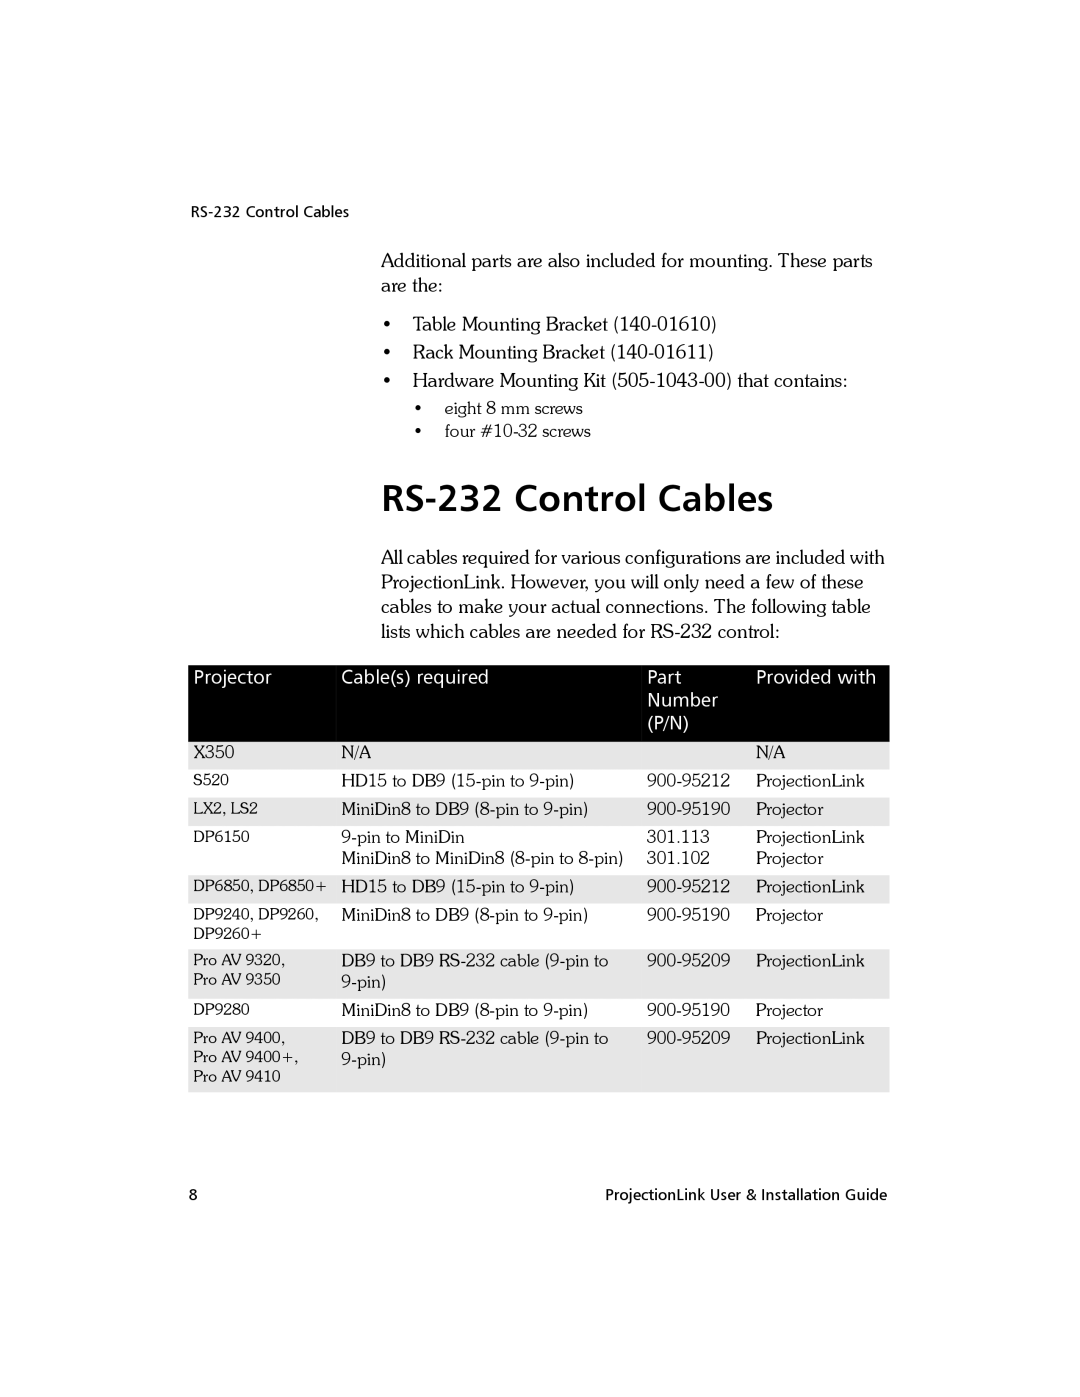 Proxima ASA BNDL-001, PL-300E manual RS-232 Control Cables, Projector, Cables required, Part, Provided with, Number 